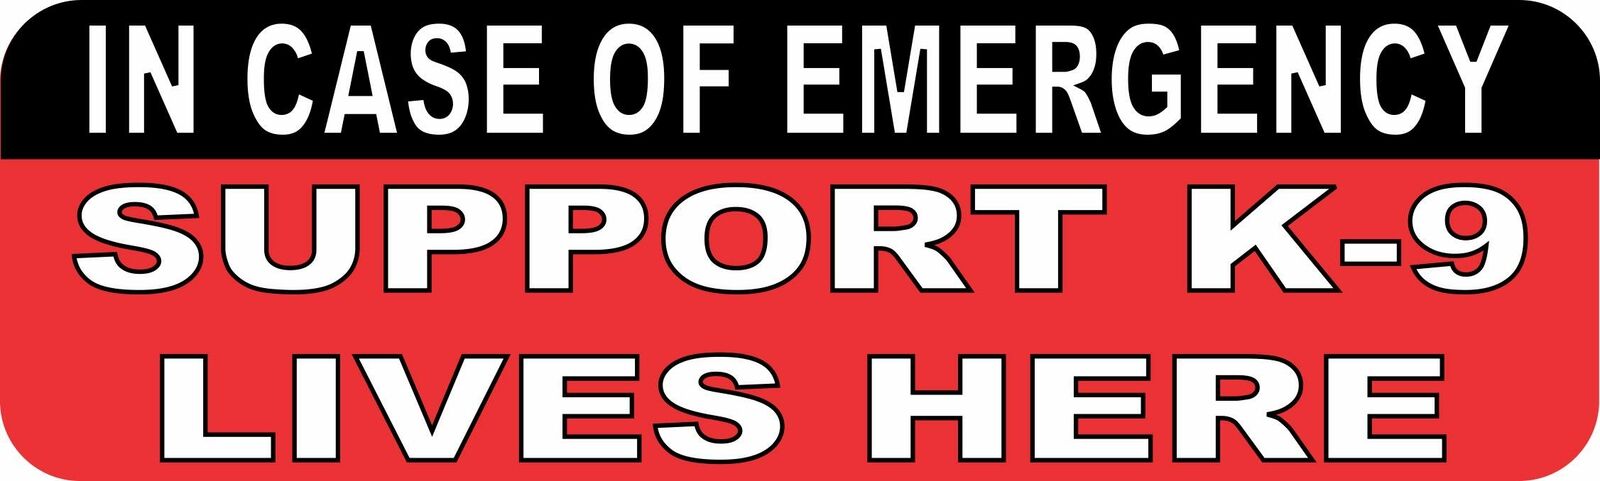 10inx3in In Case Of Emergency Support K-9 Lives Here Vinyl Magnet House Magnets